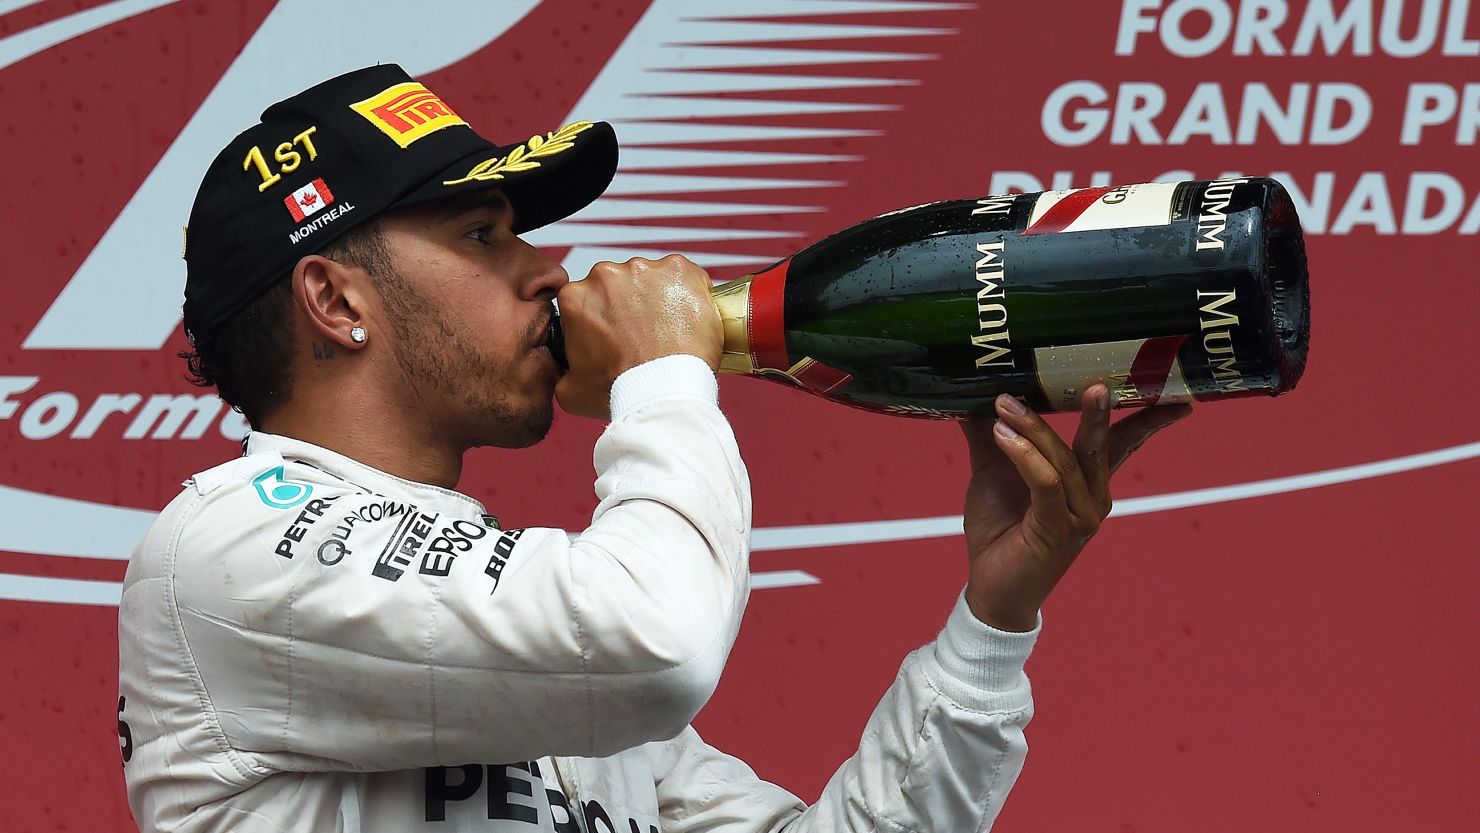 A champagne moment for Lewis Hamilton after winning for the fourth time at the Gilles Villeneuve circuit in Montreal.